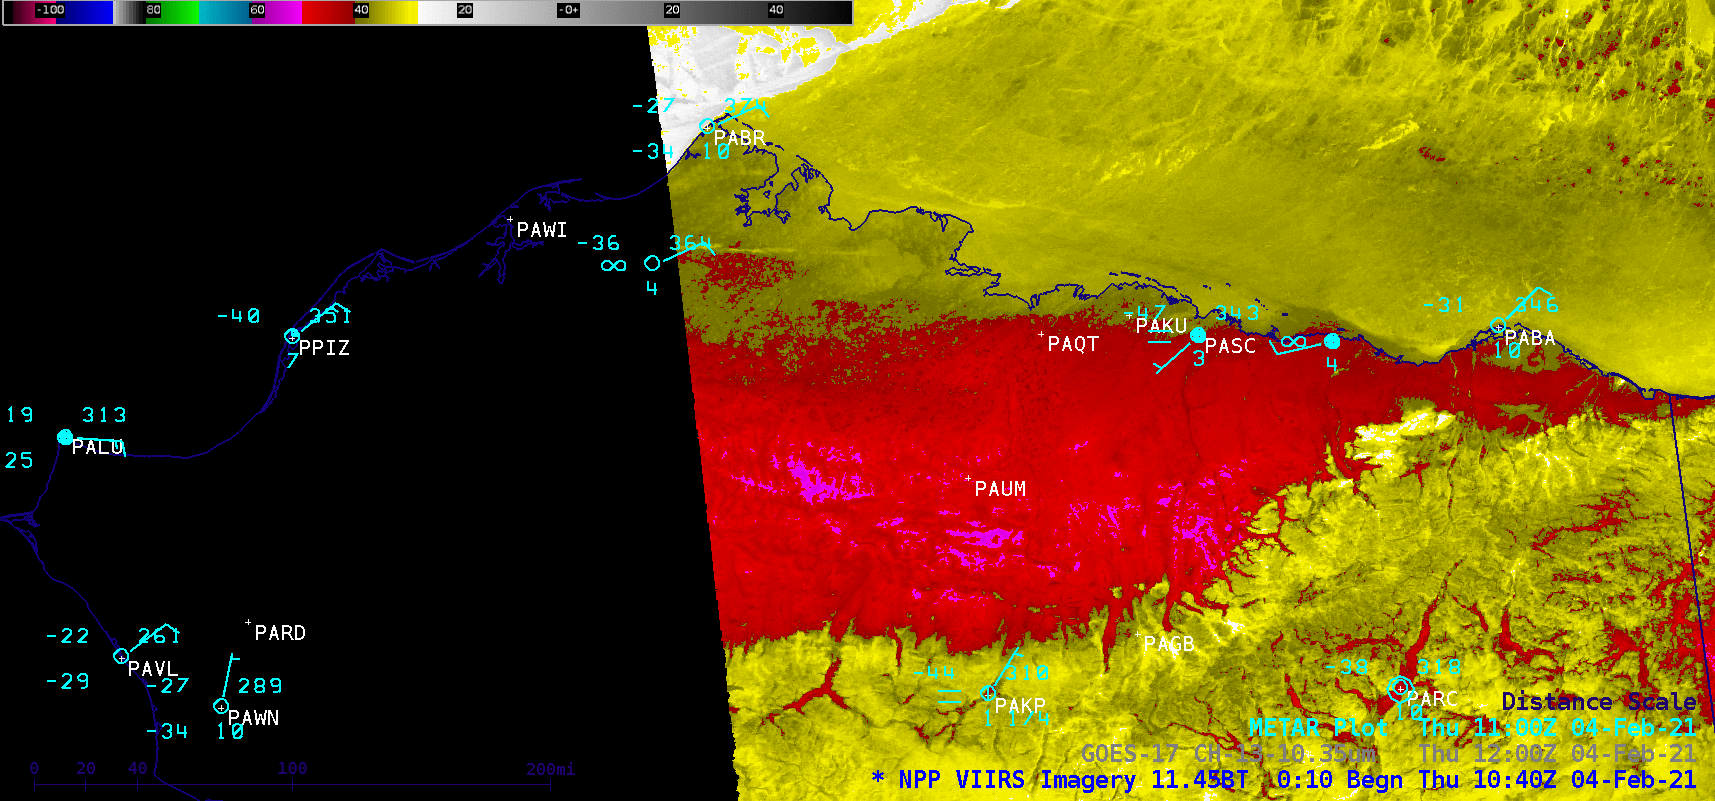 Suomi NPP VIIRS Infrared Window (11.45 µm) images [click to enlarge]